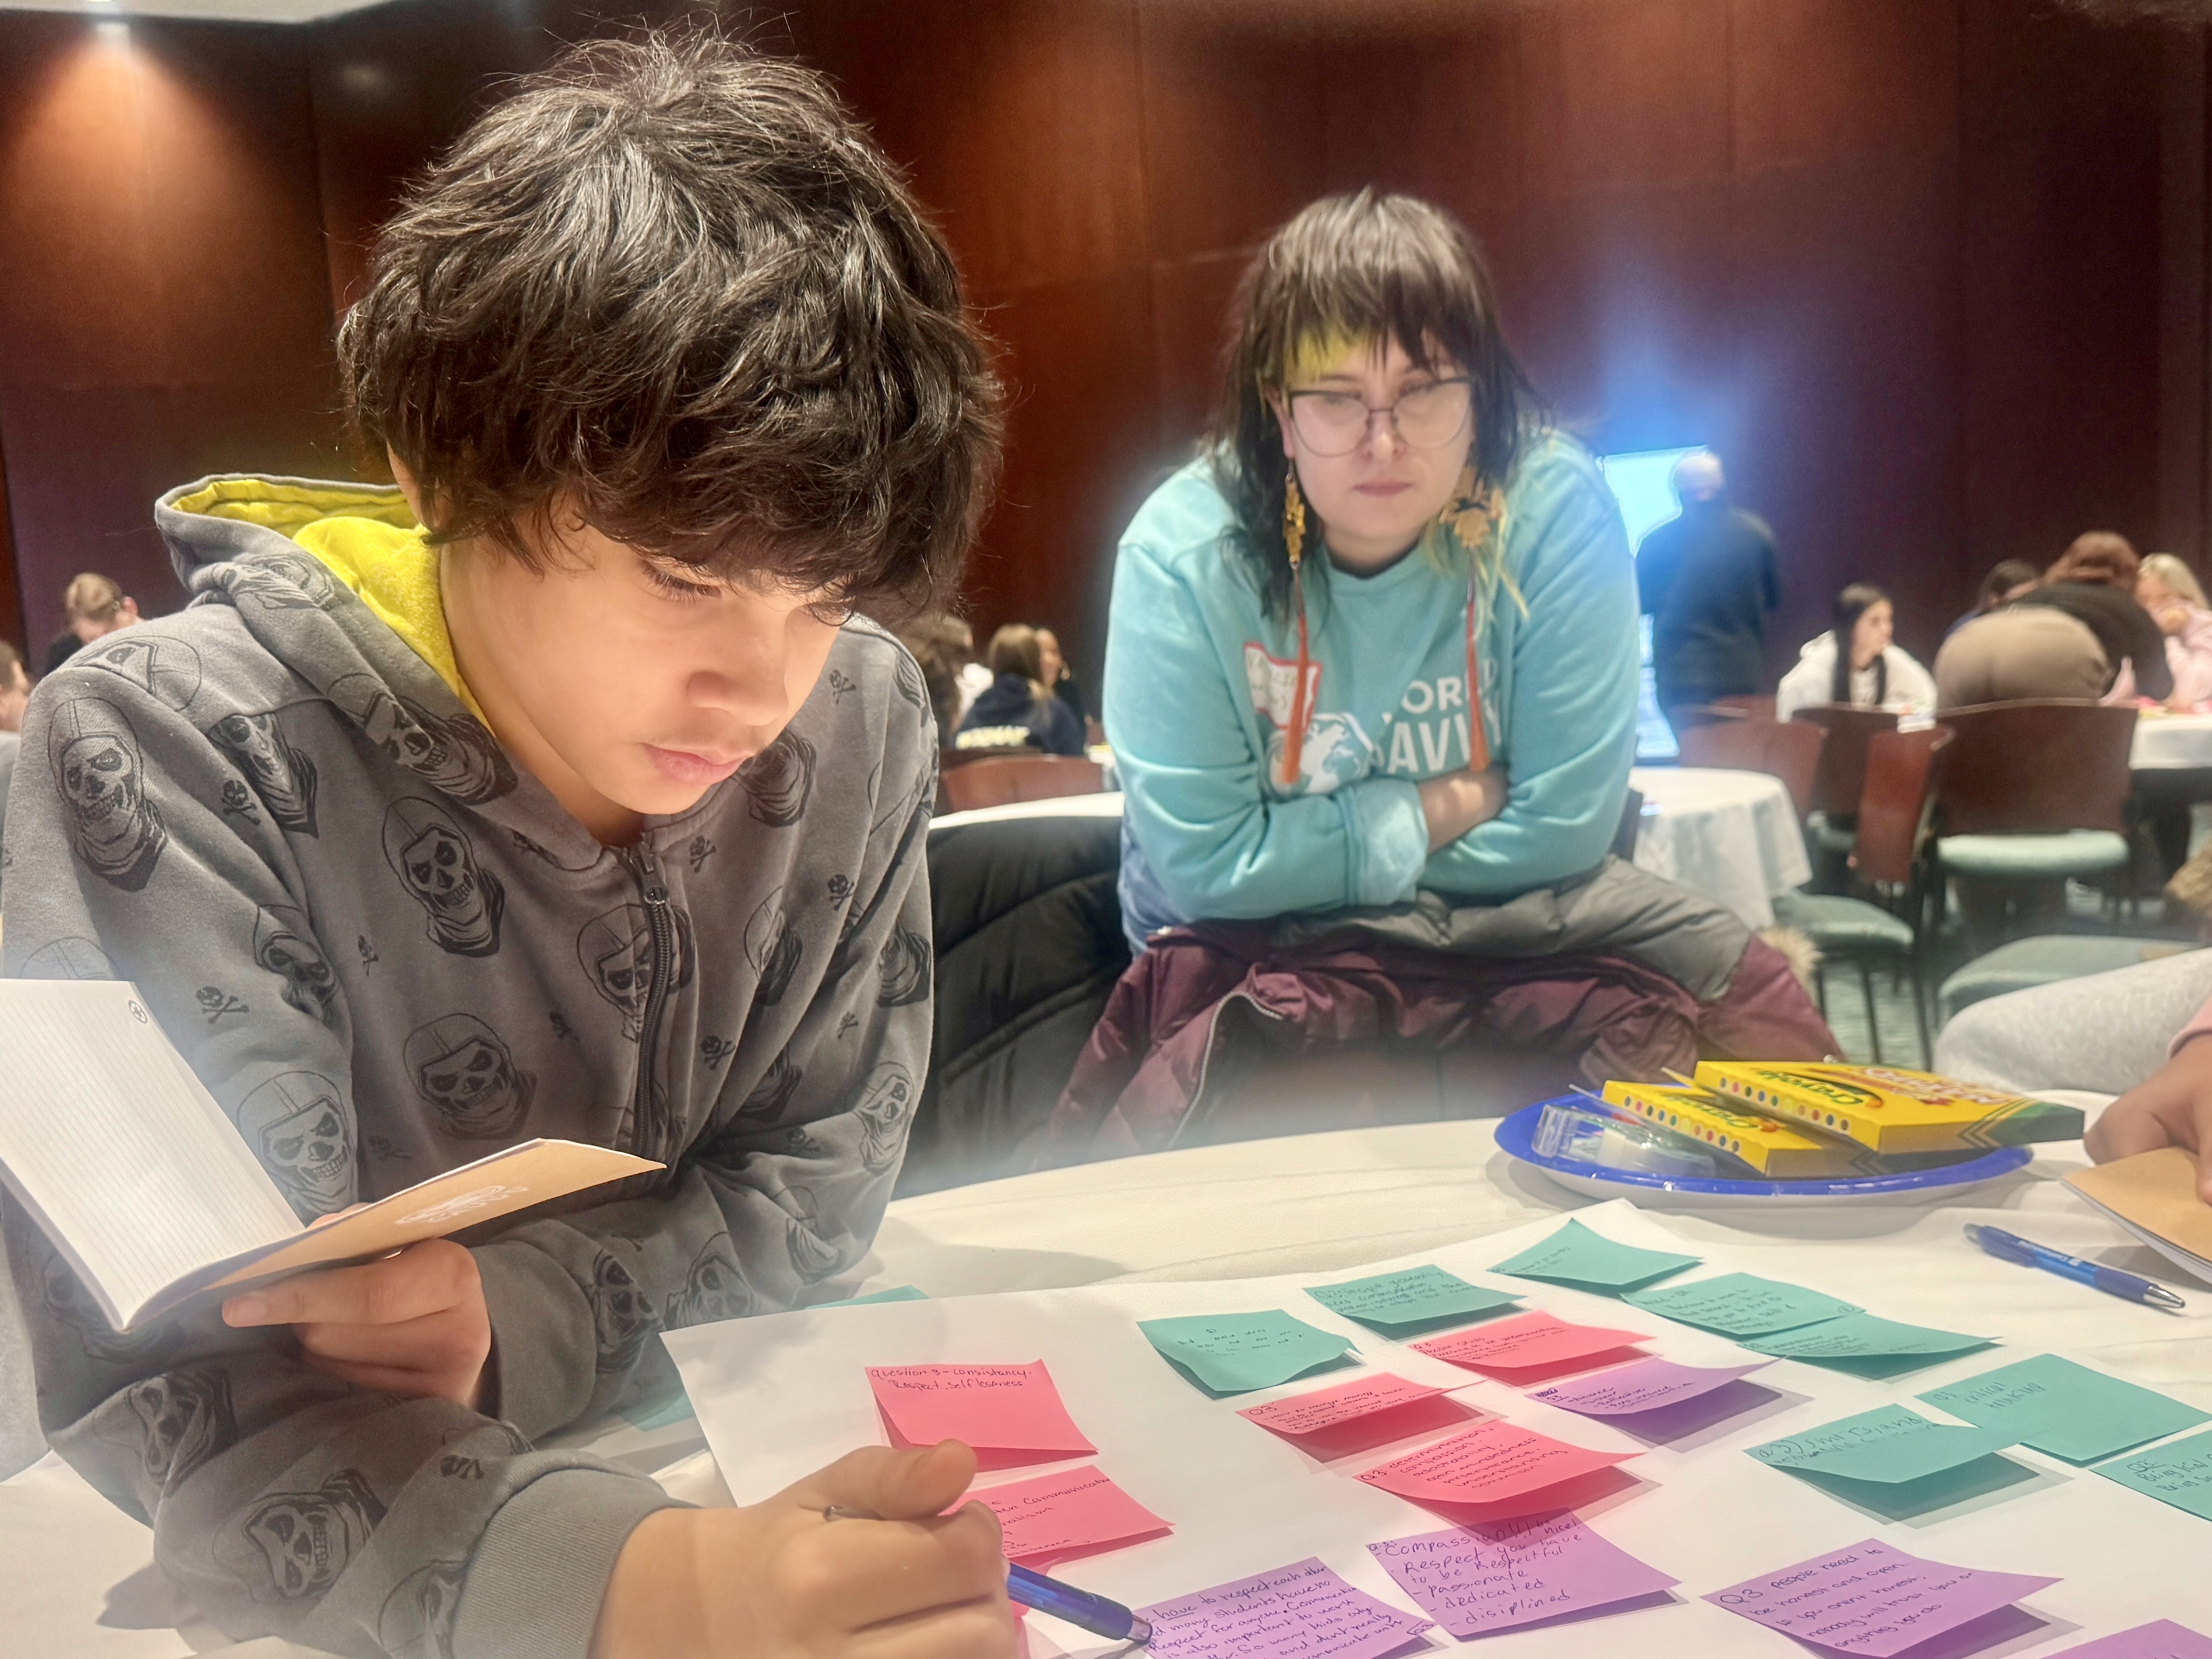 student looks at post-it notes on white board with woman looking over his shoulder in background.